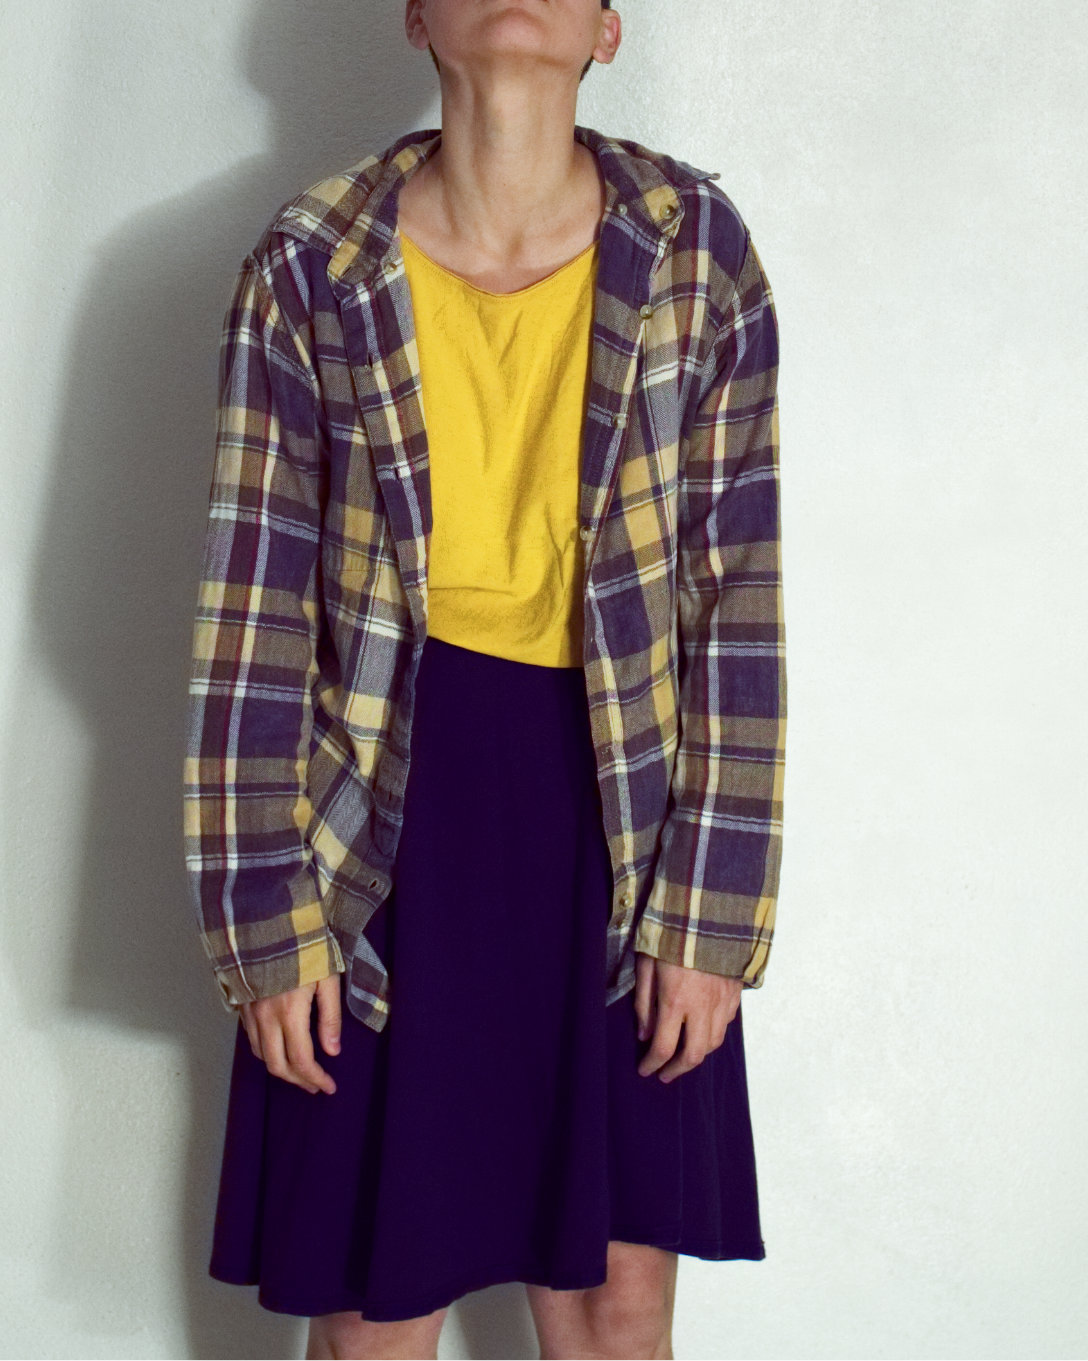 Model wears a yellow and grey plaid shirt, yellow undershirt and dark blue skirt, most of their face is out of the frame, eyes hidden